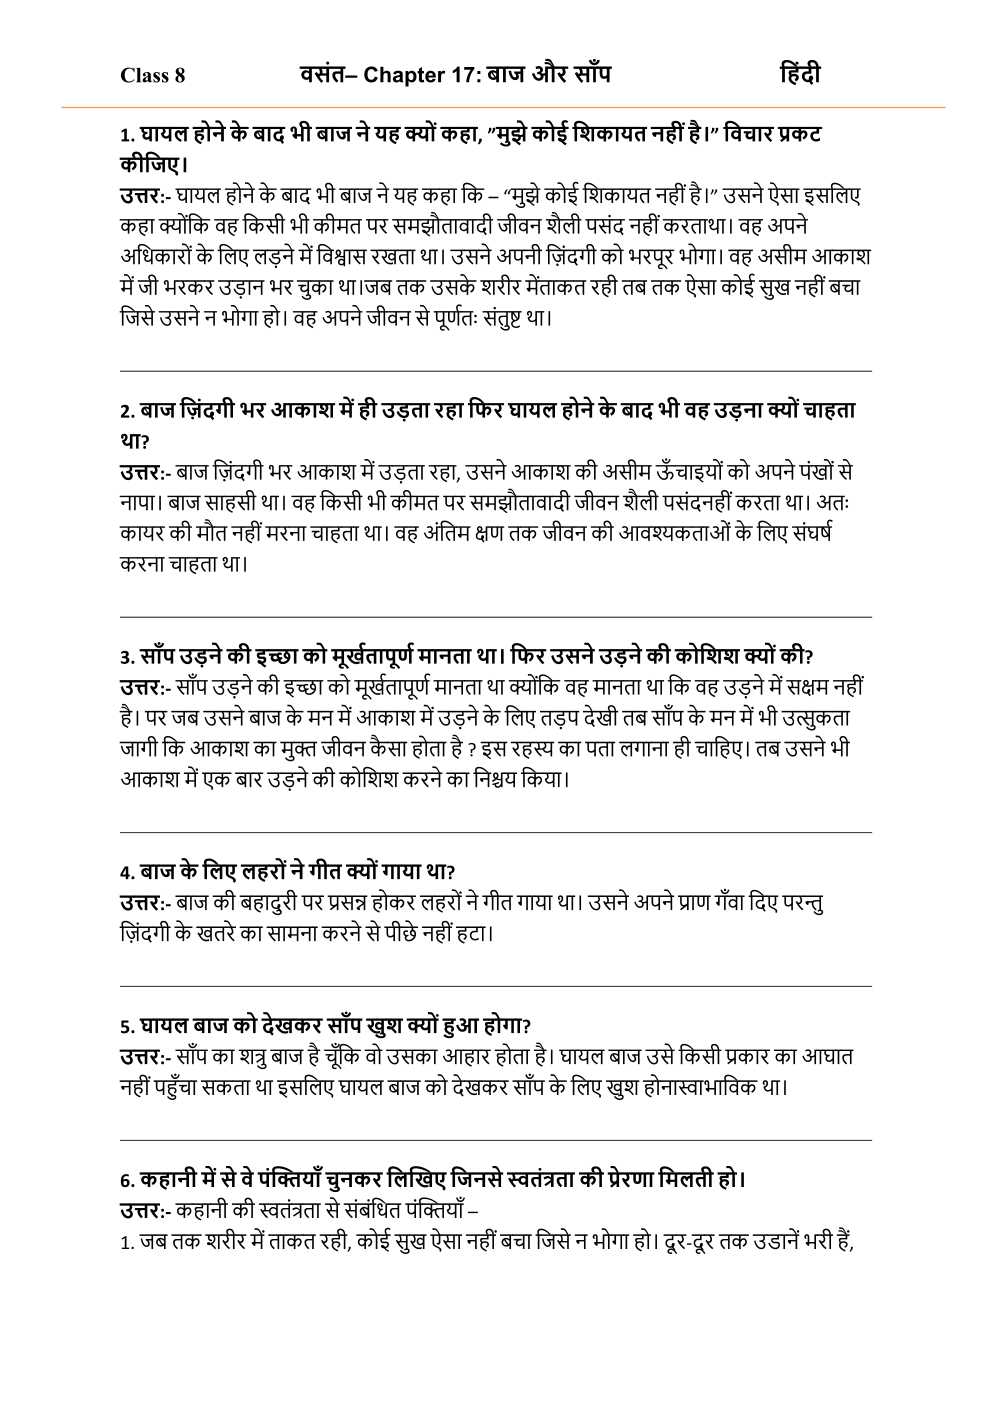 NCERT Solutions For Class 8 Hindi Vasant Chapter 17